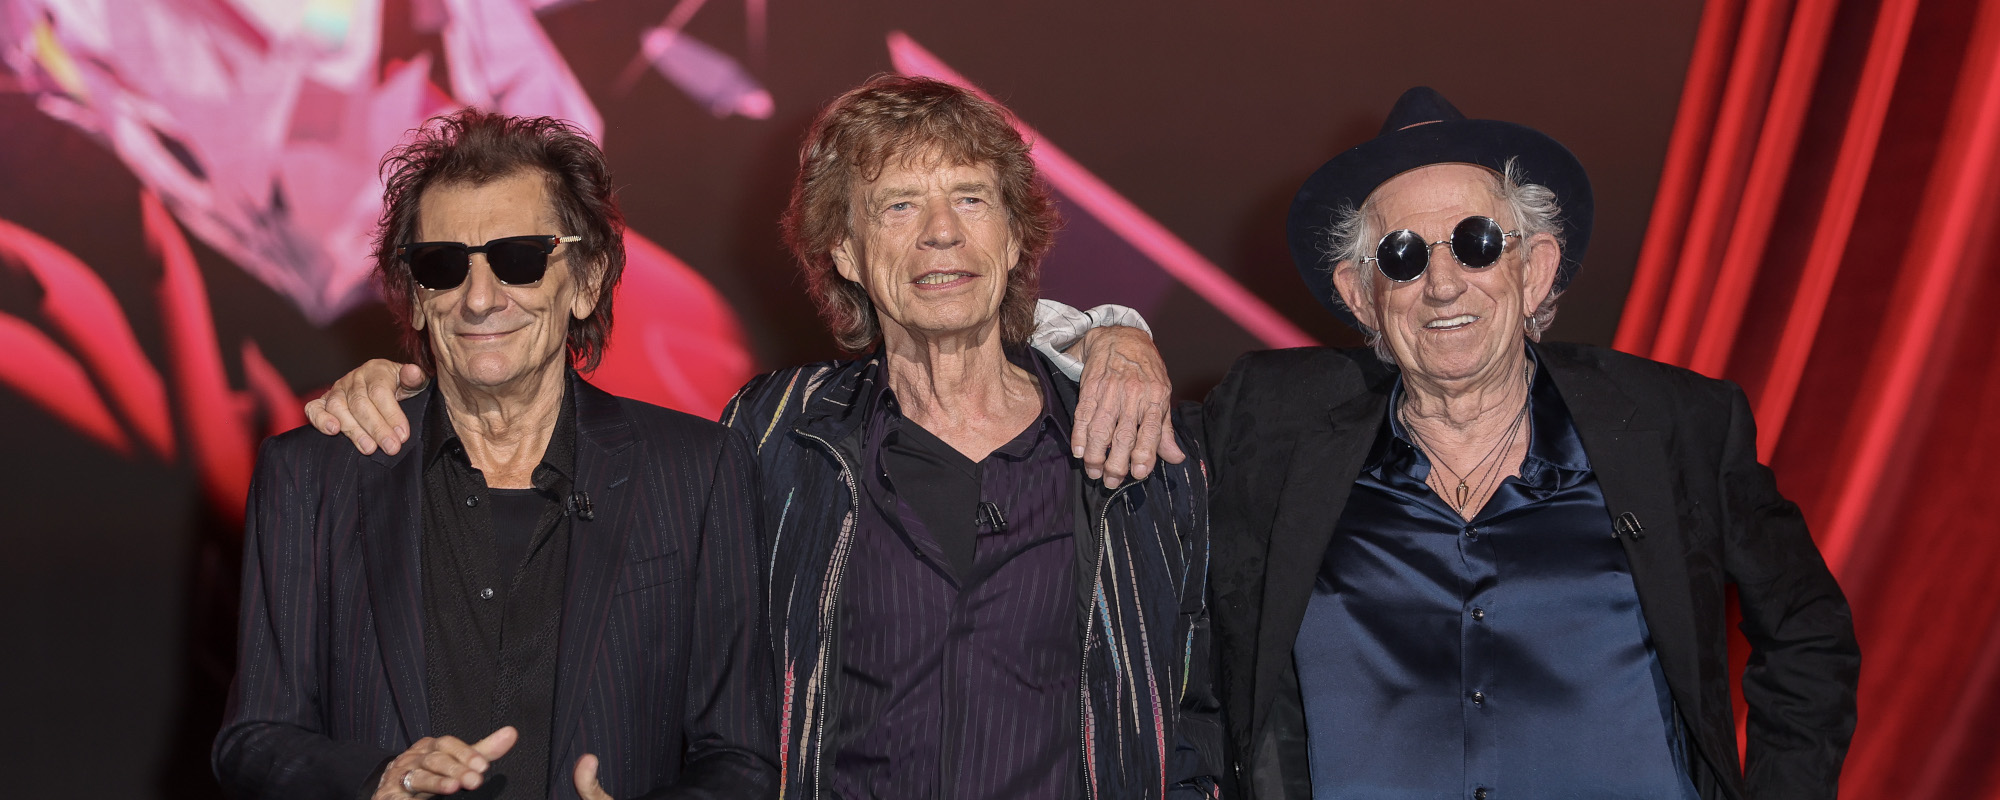 5 Things to Know About the Rolling Stones